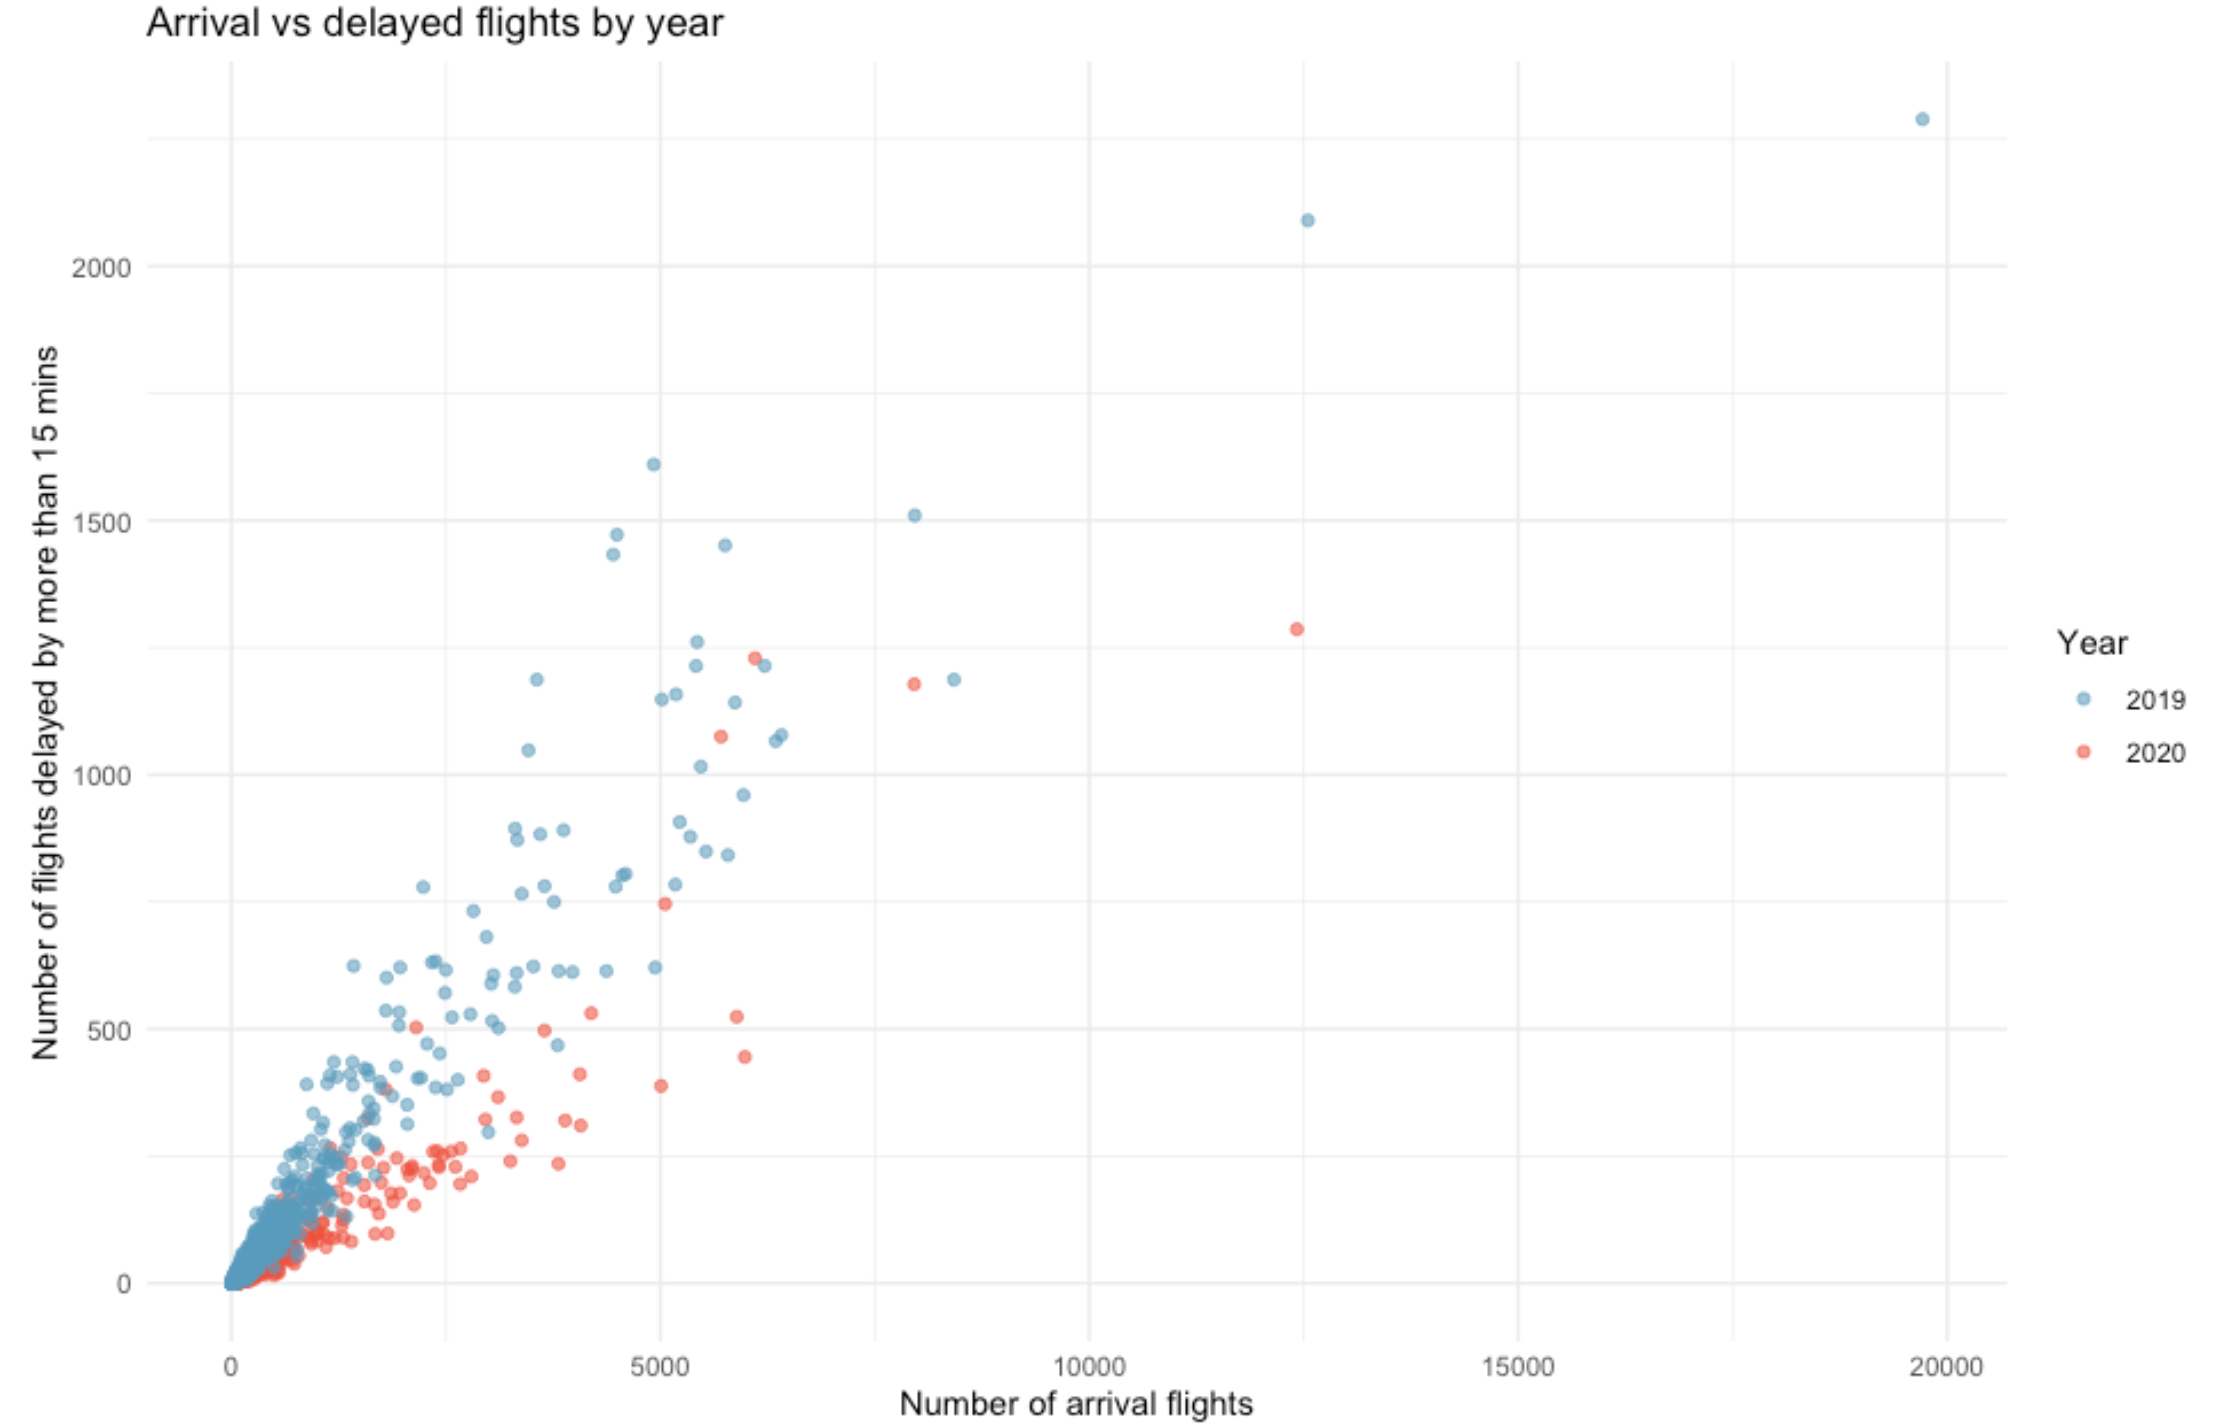 Scatterplot showing the number of flights delayed by at least 15 minutes (y-axis) against the number of arrival flights, where a point is placed for each carrier in each city in the data set and for each year (2019 or 2020). The points are colored blue for 2019 and red for 2020. The points generally start near (0, 0) and then fan out up and to the right. The blue 2019 points generally show a fan above the red 2020 fan of points.